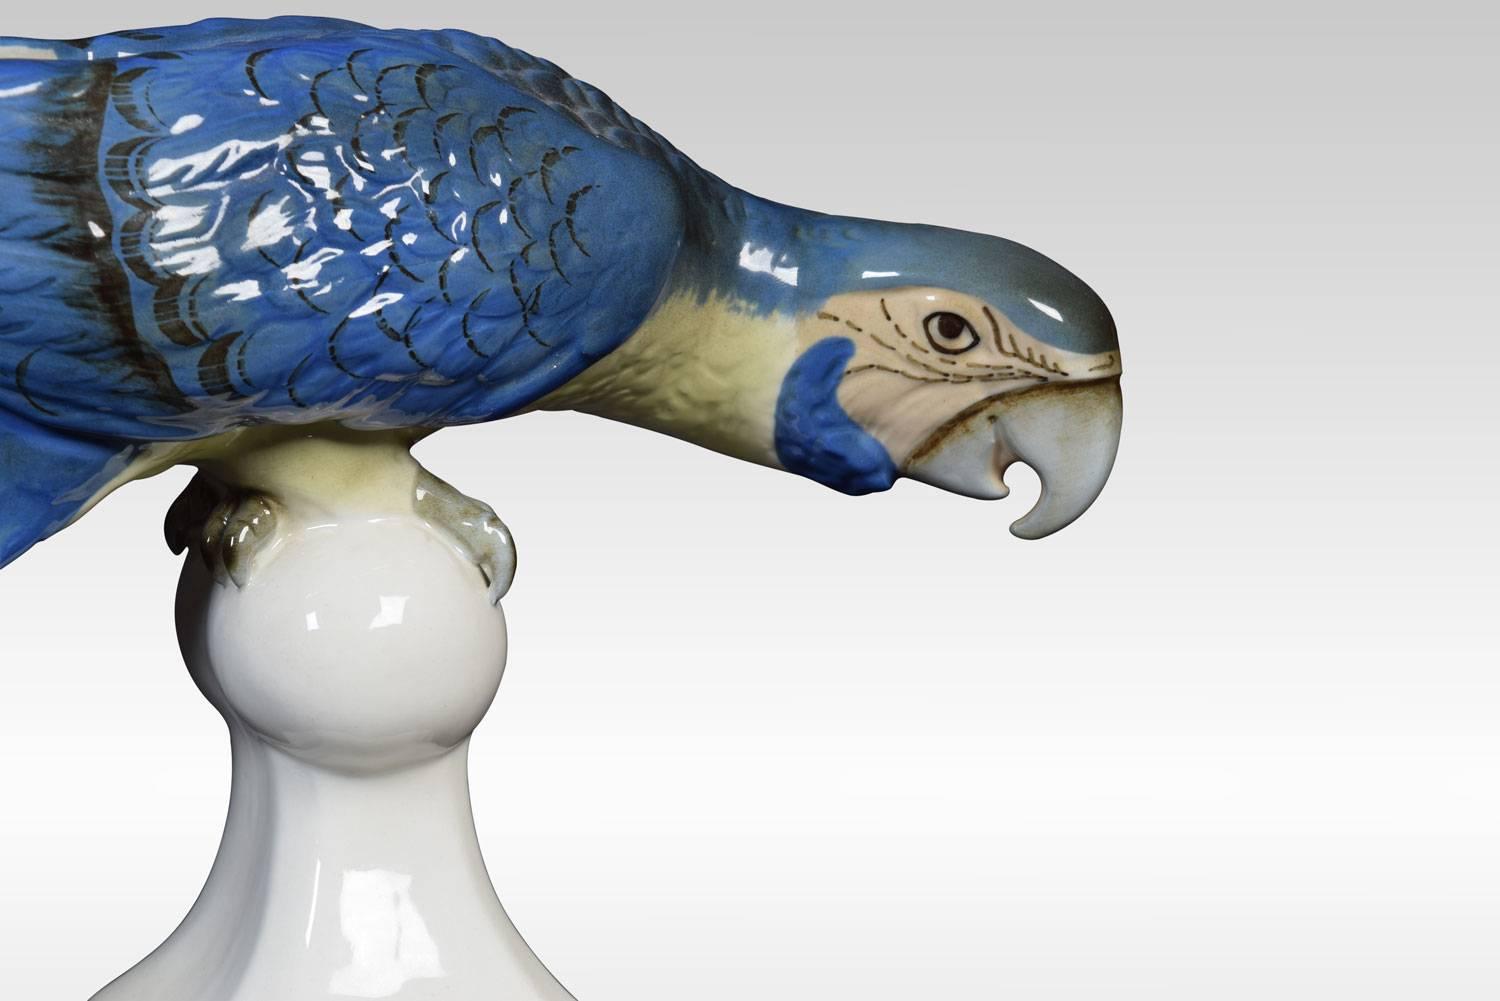 Royal Dux model of a blue macaw, perched on a Stand in typical inquisitive stance. Having pink triangle to base, together with printed and impressed marks.
Dimensions:
Height 8.5 inches
Width 17 inches
Depth 5 inches.